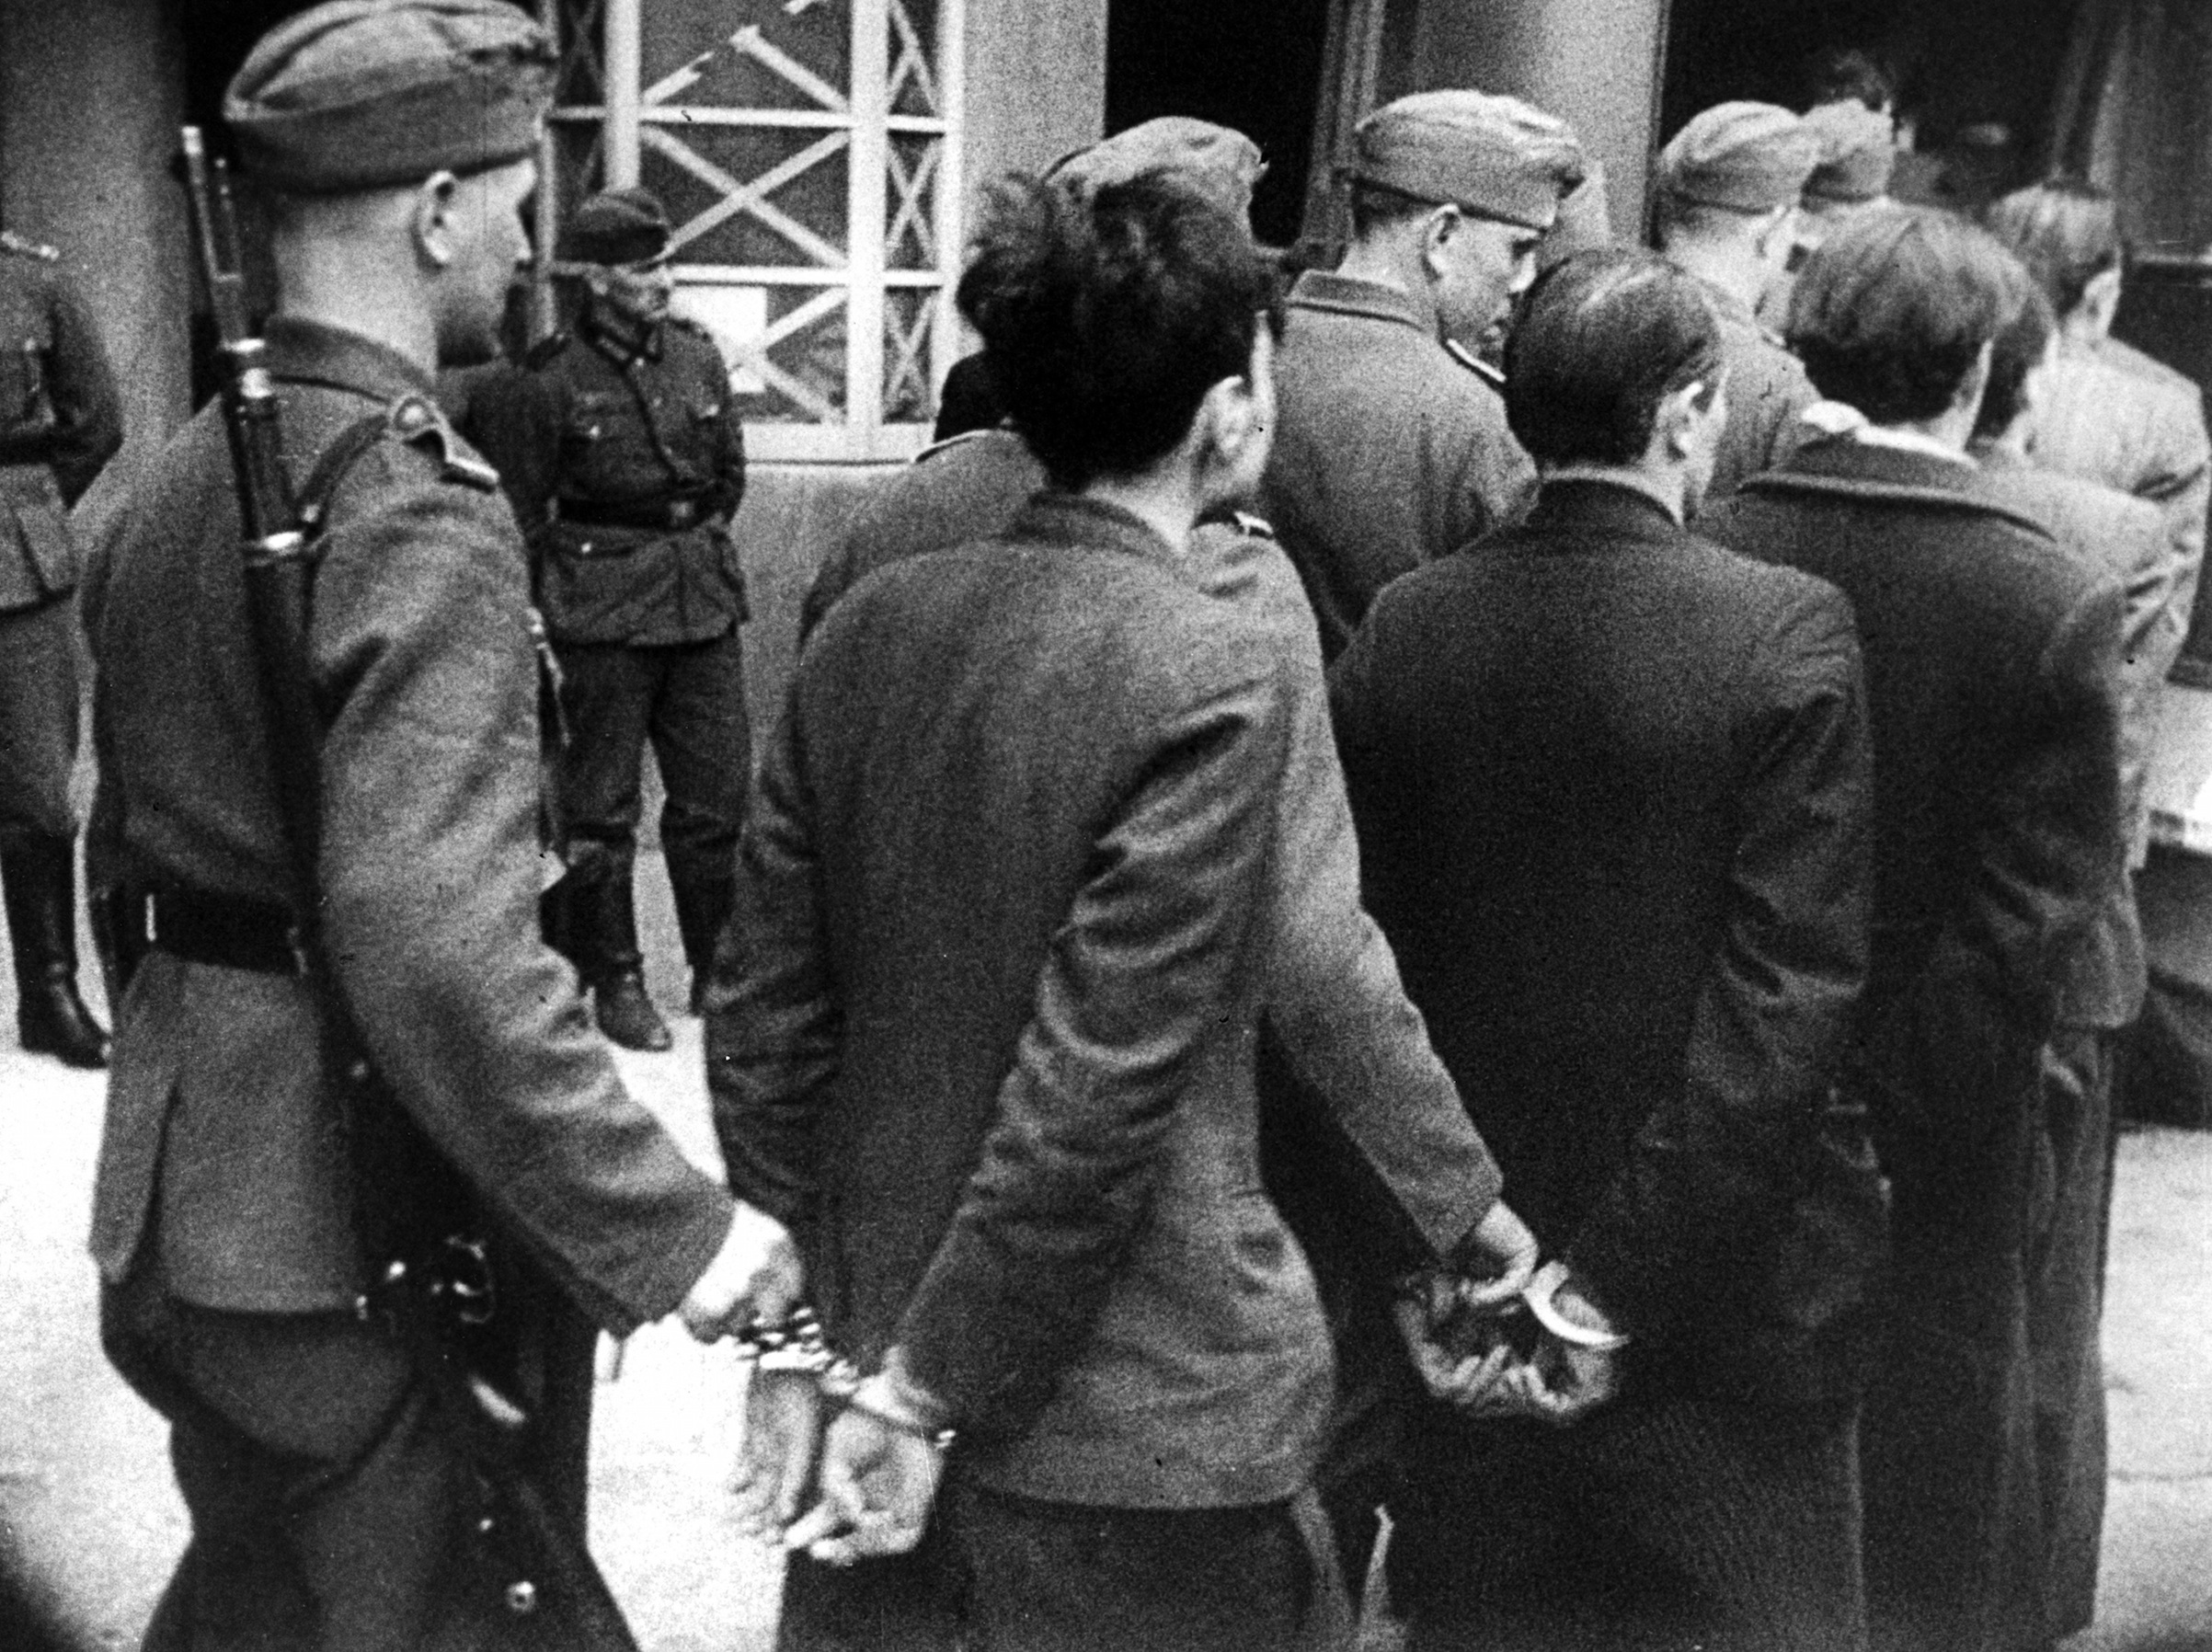 Members of the French Resistance being taken for execution after a trial, Paris, 14 April 1942